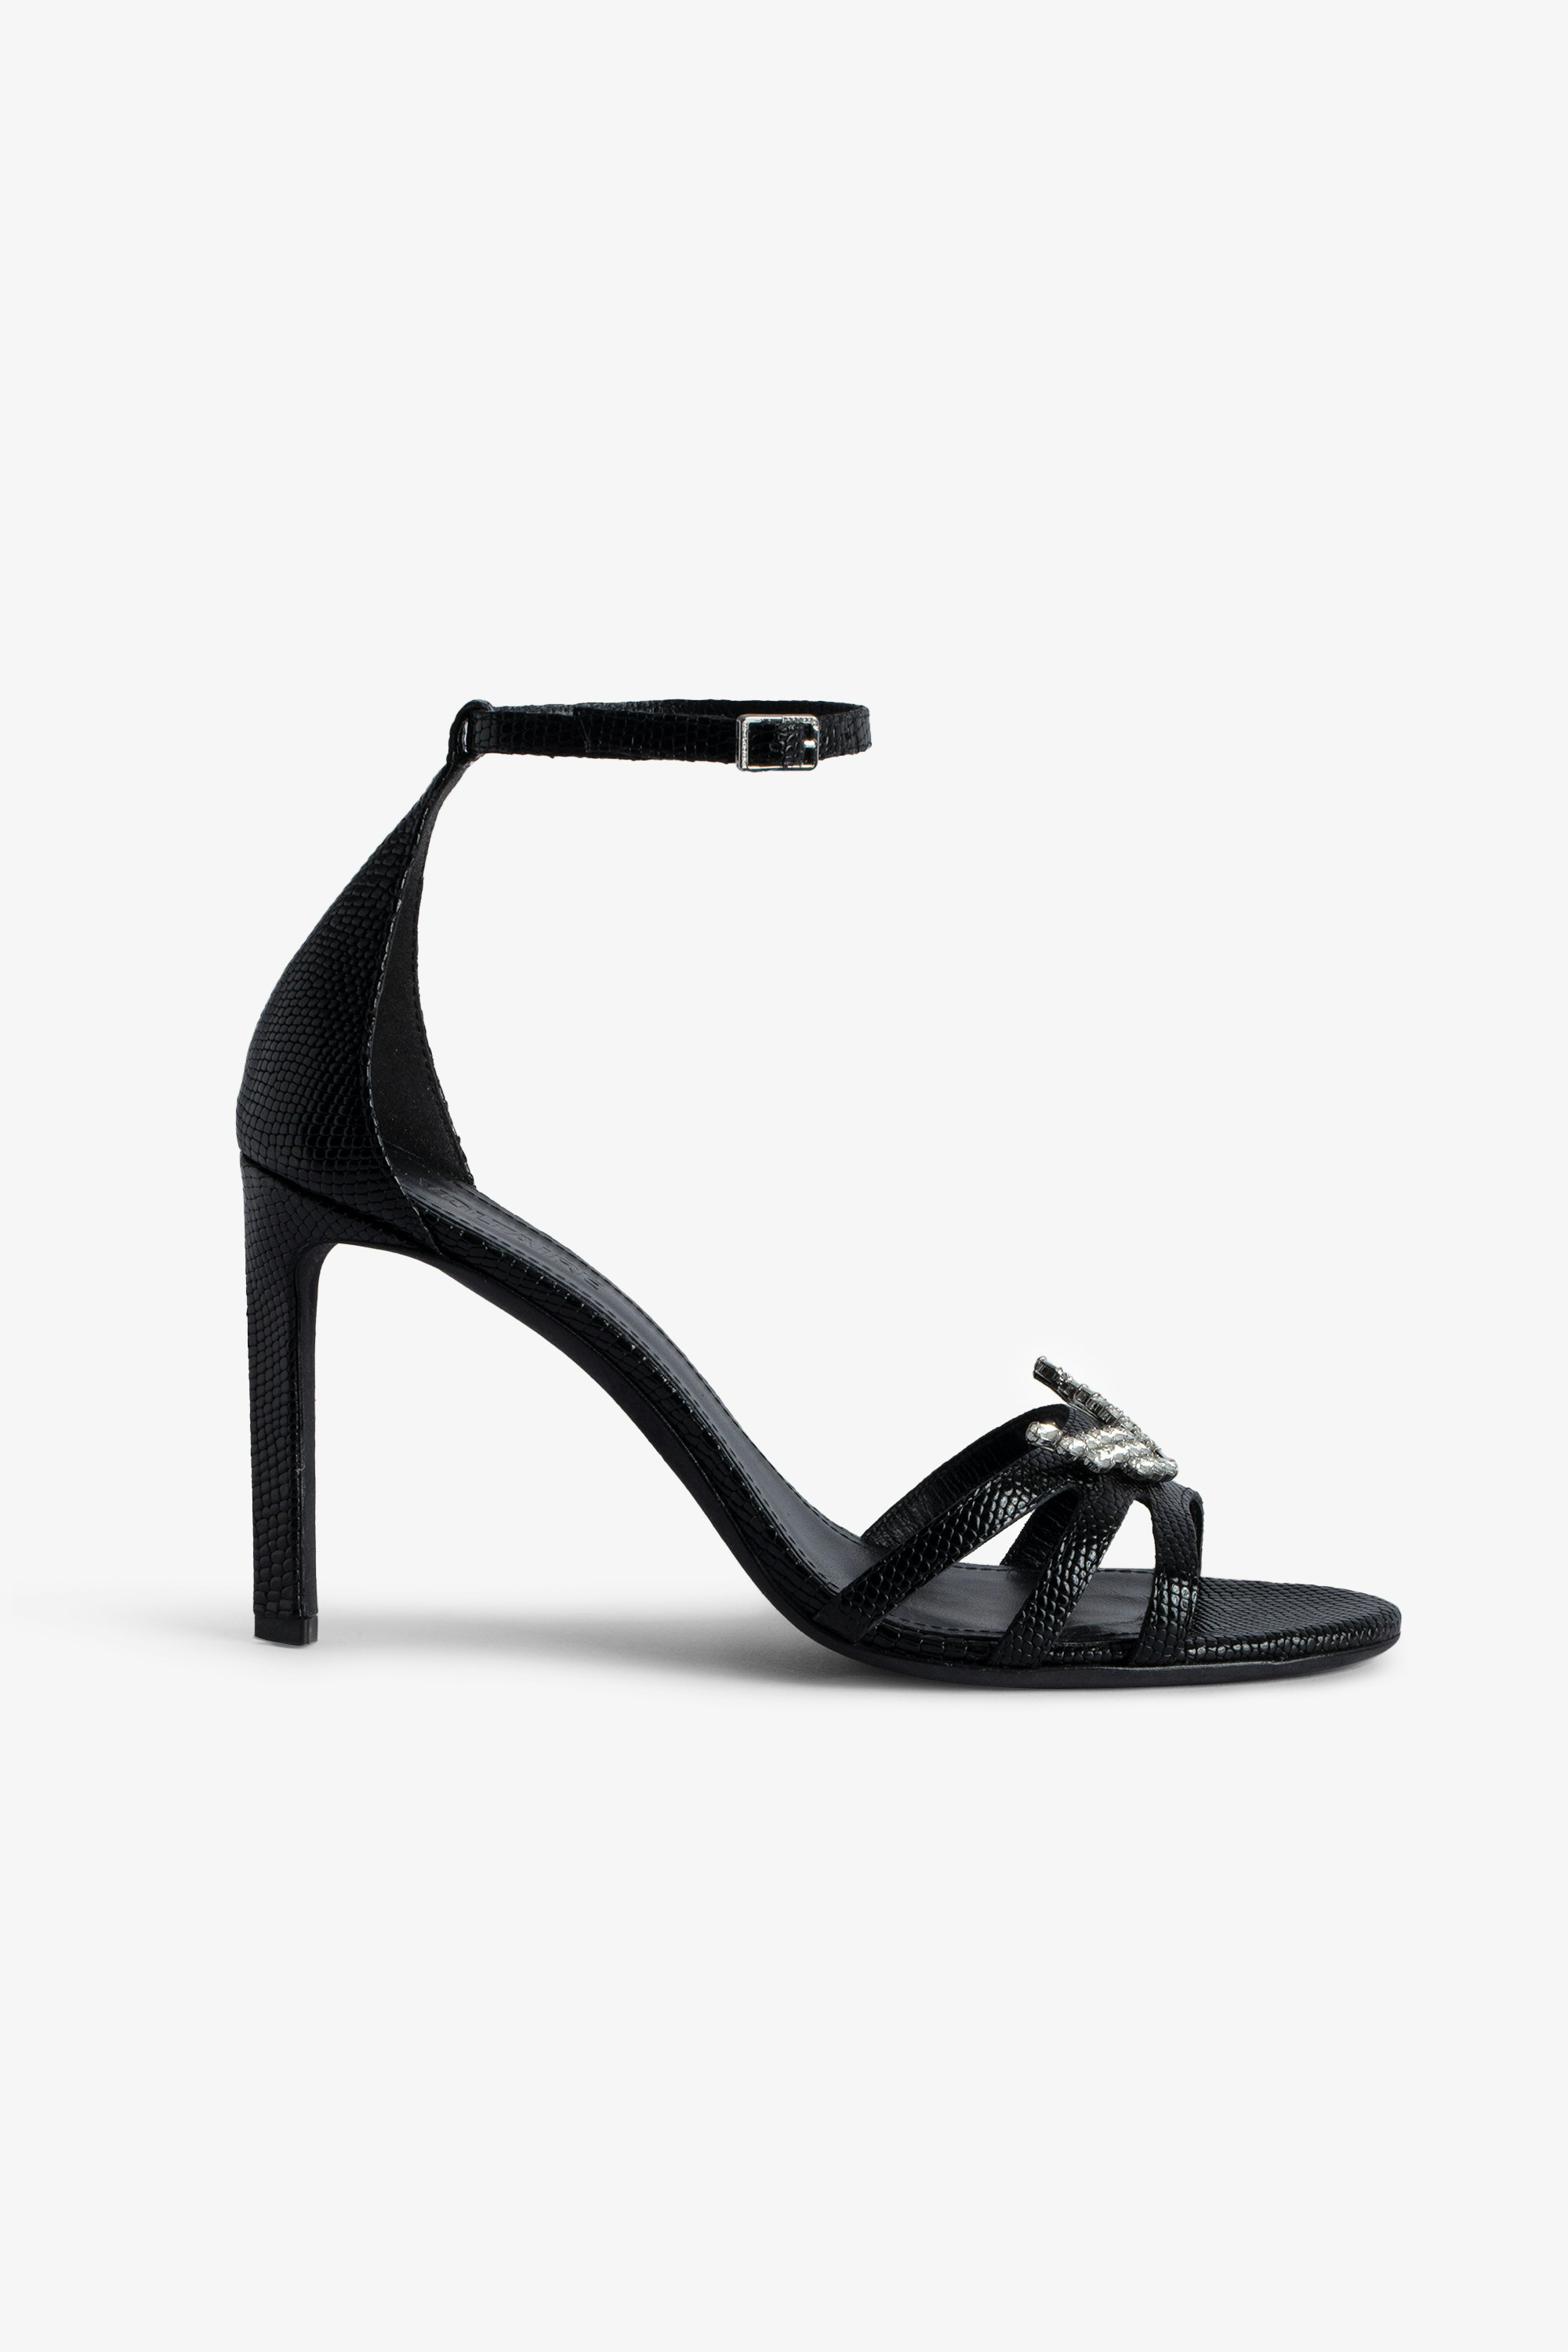 Amee Wing Court Shoes - Women’s black iguana-embossed leather court shoes with straps and diamanté wings charm.